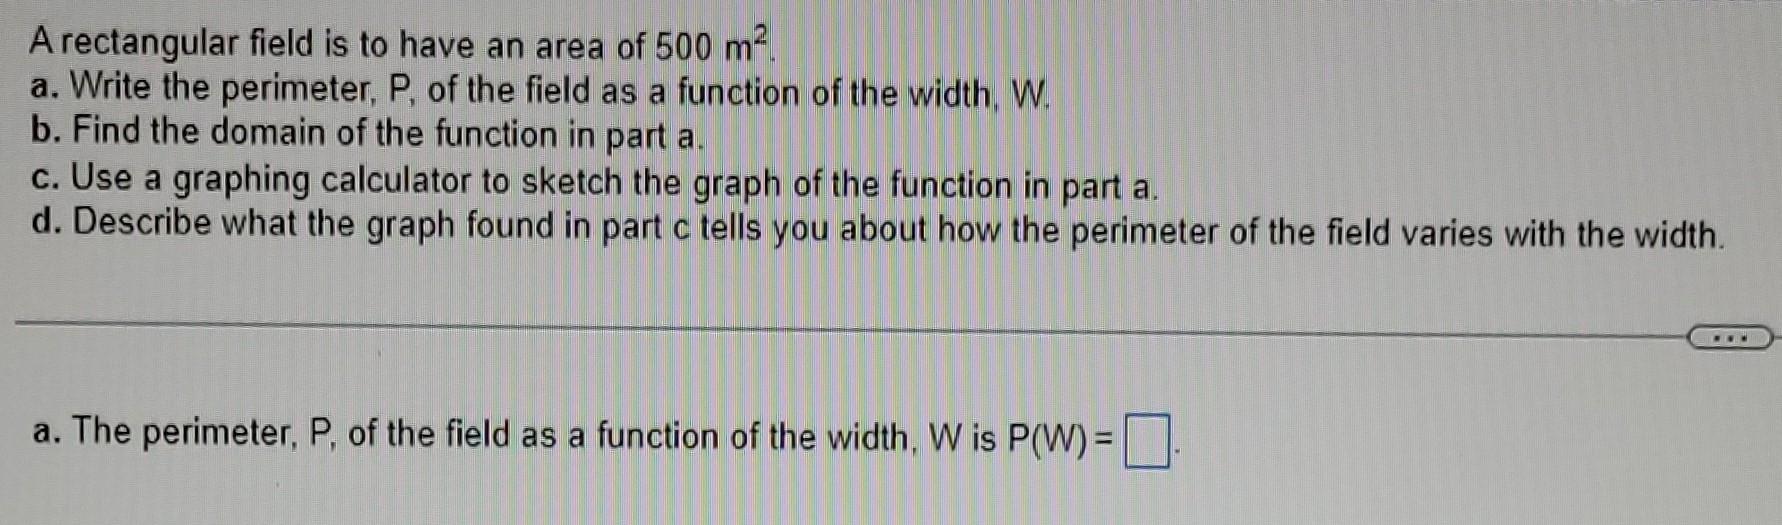 A rectangular field is to have an area of \( 500 \mathrm{~m}^{2} \).
a. Write the perimeter, P, of the field as a function of